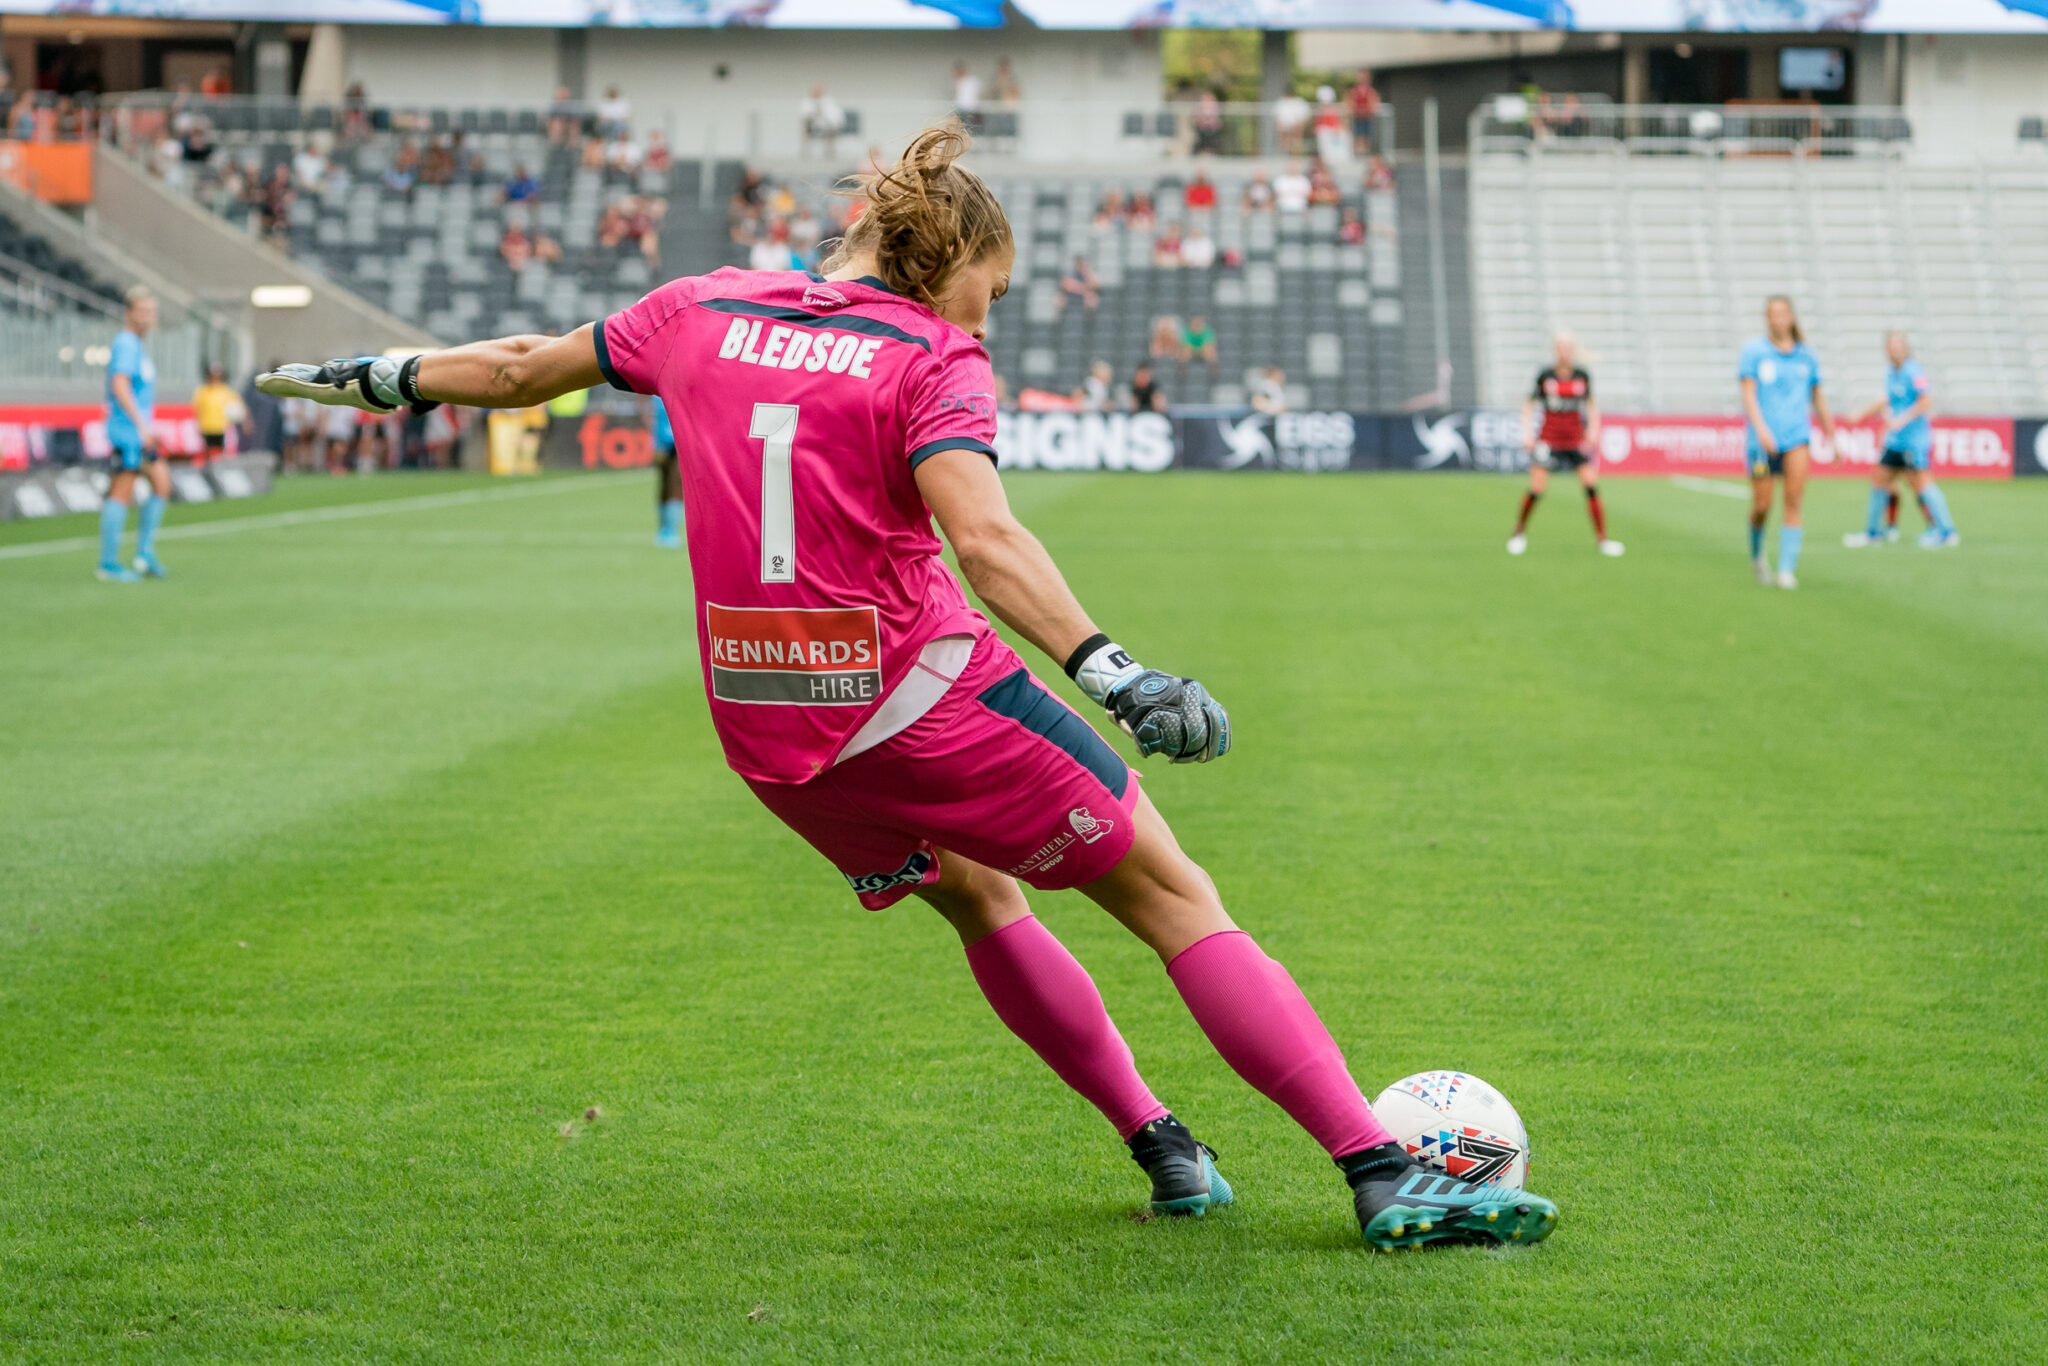 Bledsoe earns clean sheet, Staab and Thomas clash in W-League round 10 Featured Image